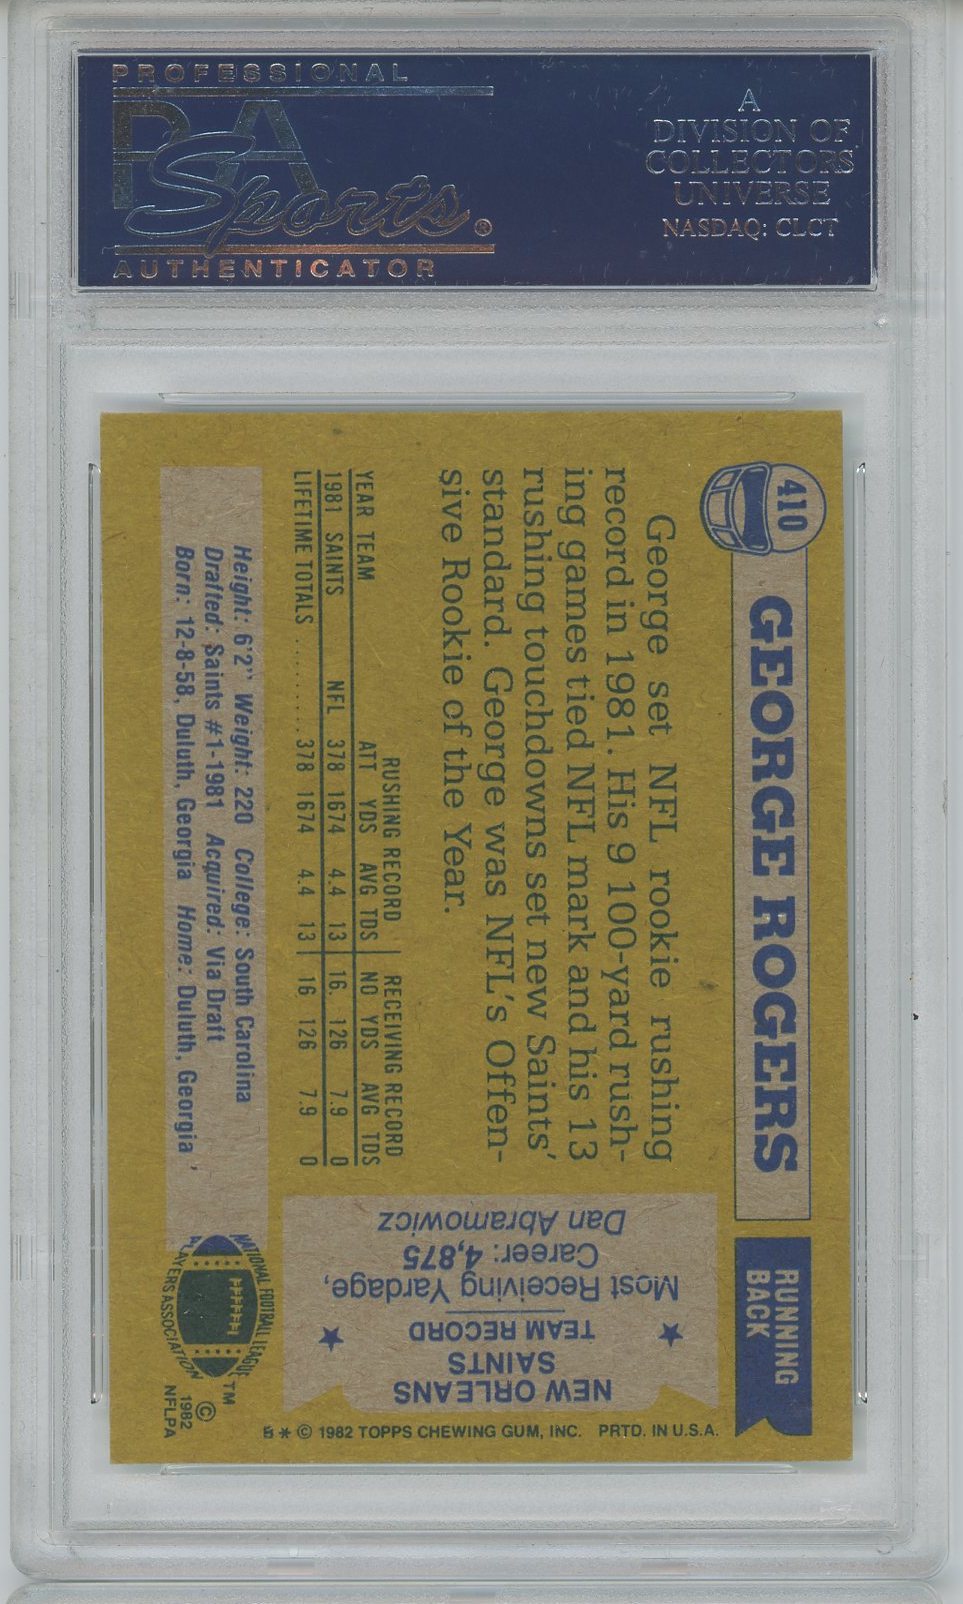 1982 TOPPS GEORGE ROGERS AUTO ROOKIE PSA/DNA